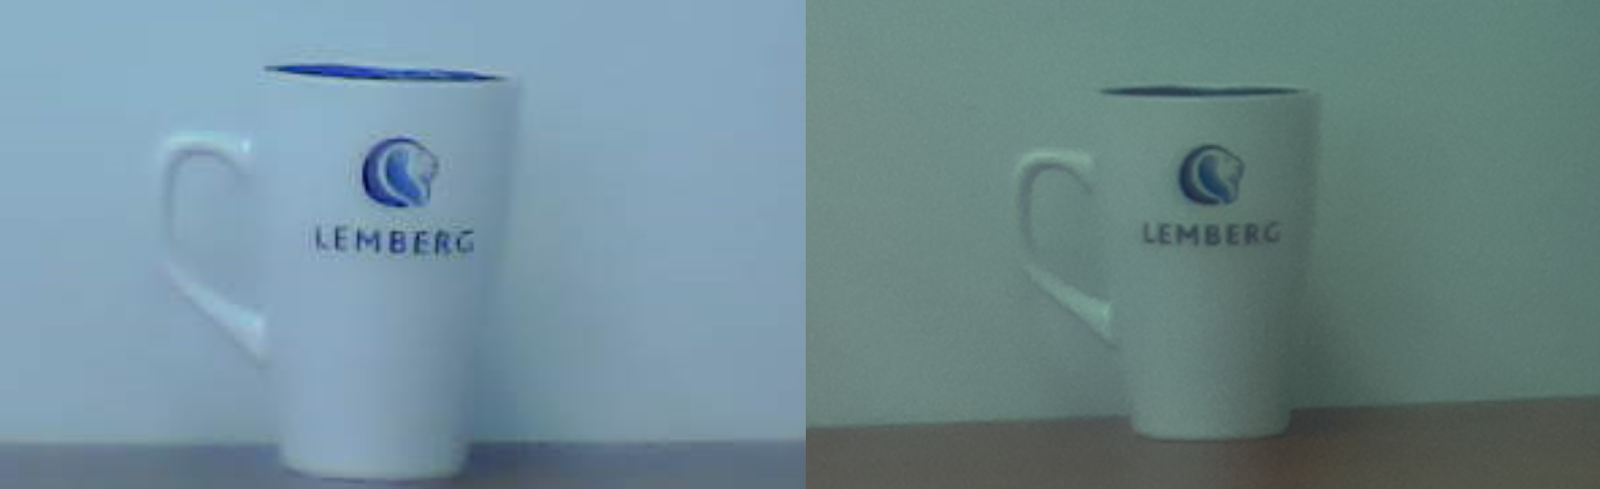 Left: 5MP uncompressed photo with an OV5467 sensor. Right: 5MP compressed photo with an IMX179 sensor. Both photos were made with the same lens.